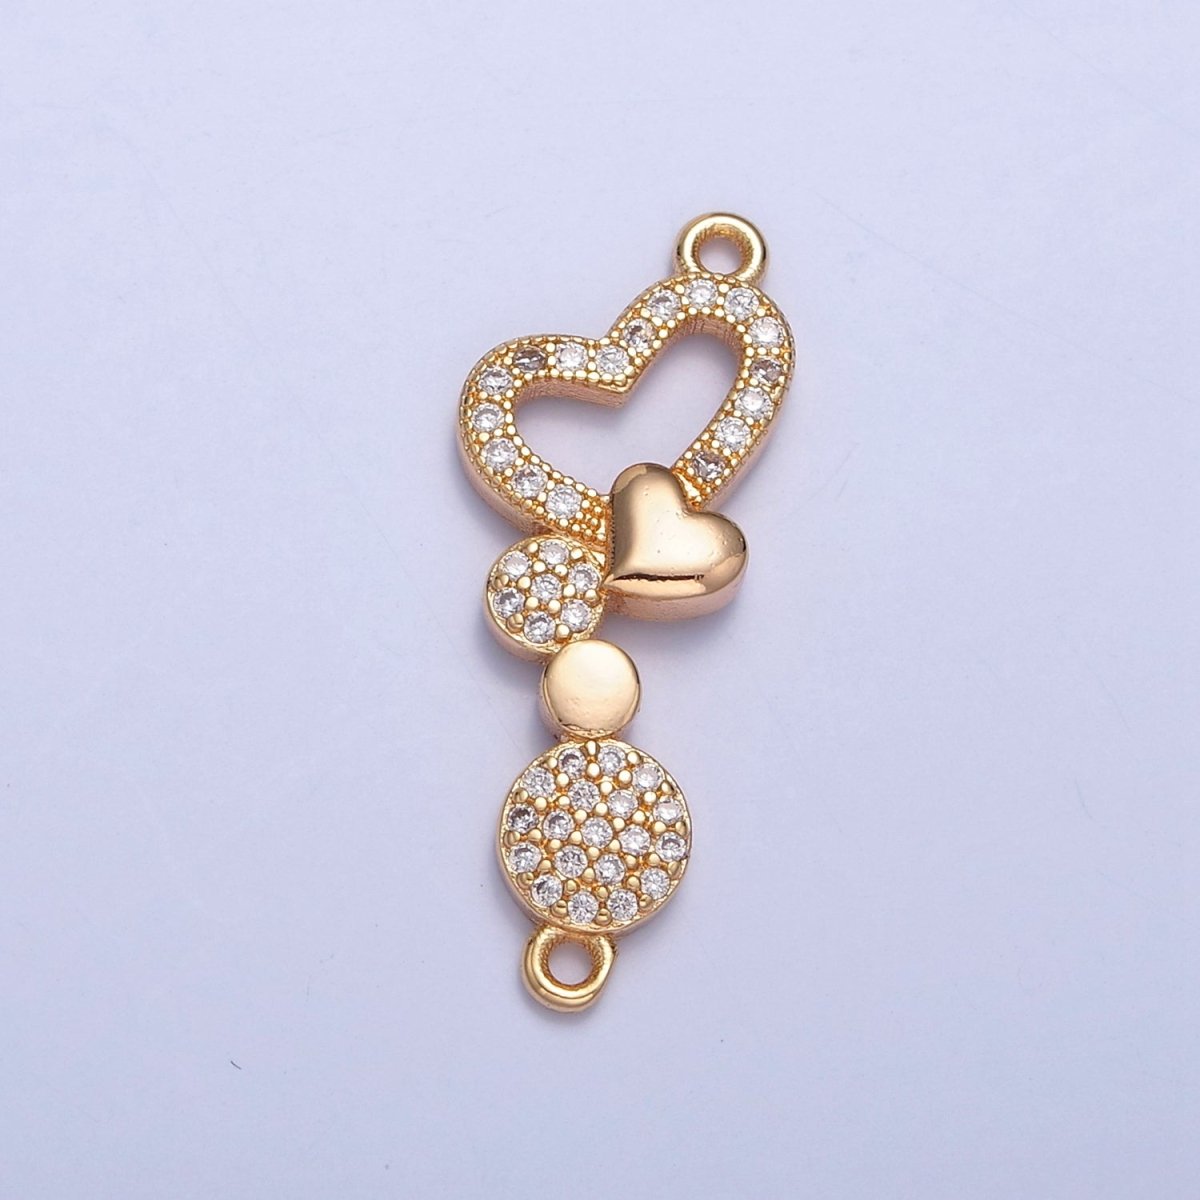 Dainty Heart CZ Gold Pave Charm Connector for Bracelet Necklace Supply F-799 - DLUXCA